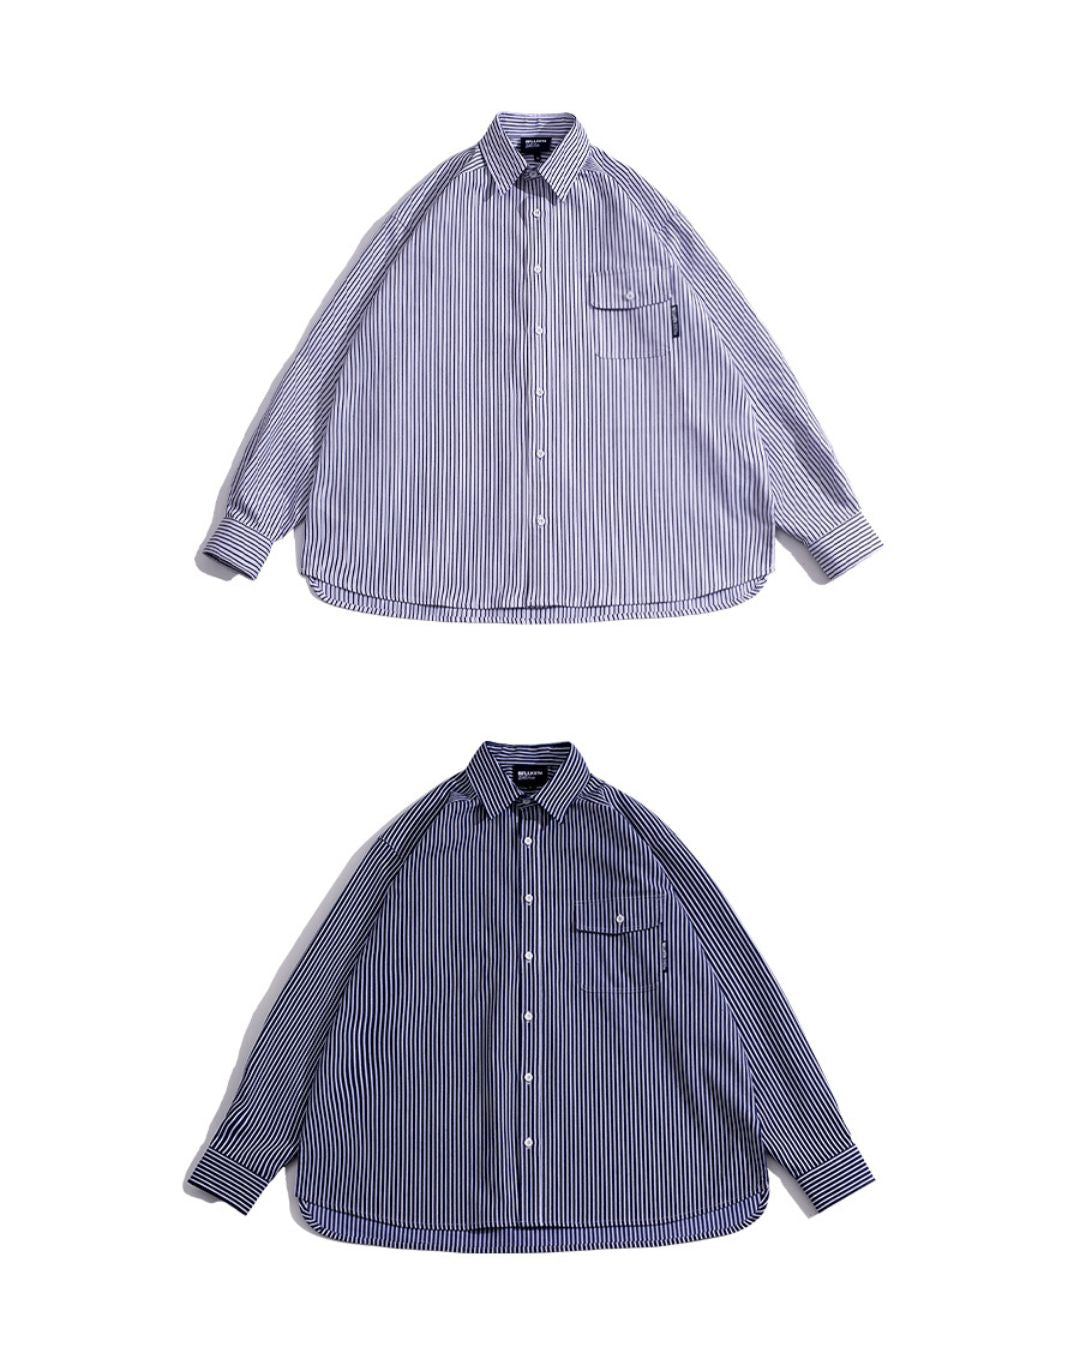 Relaxed Striped Shirt　LS035